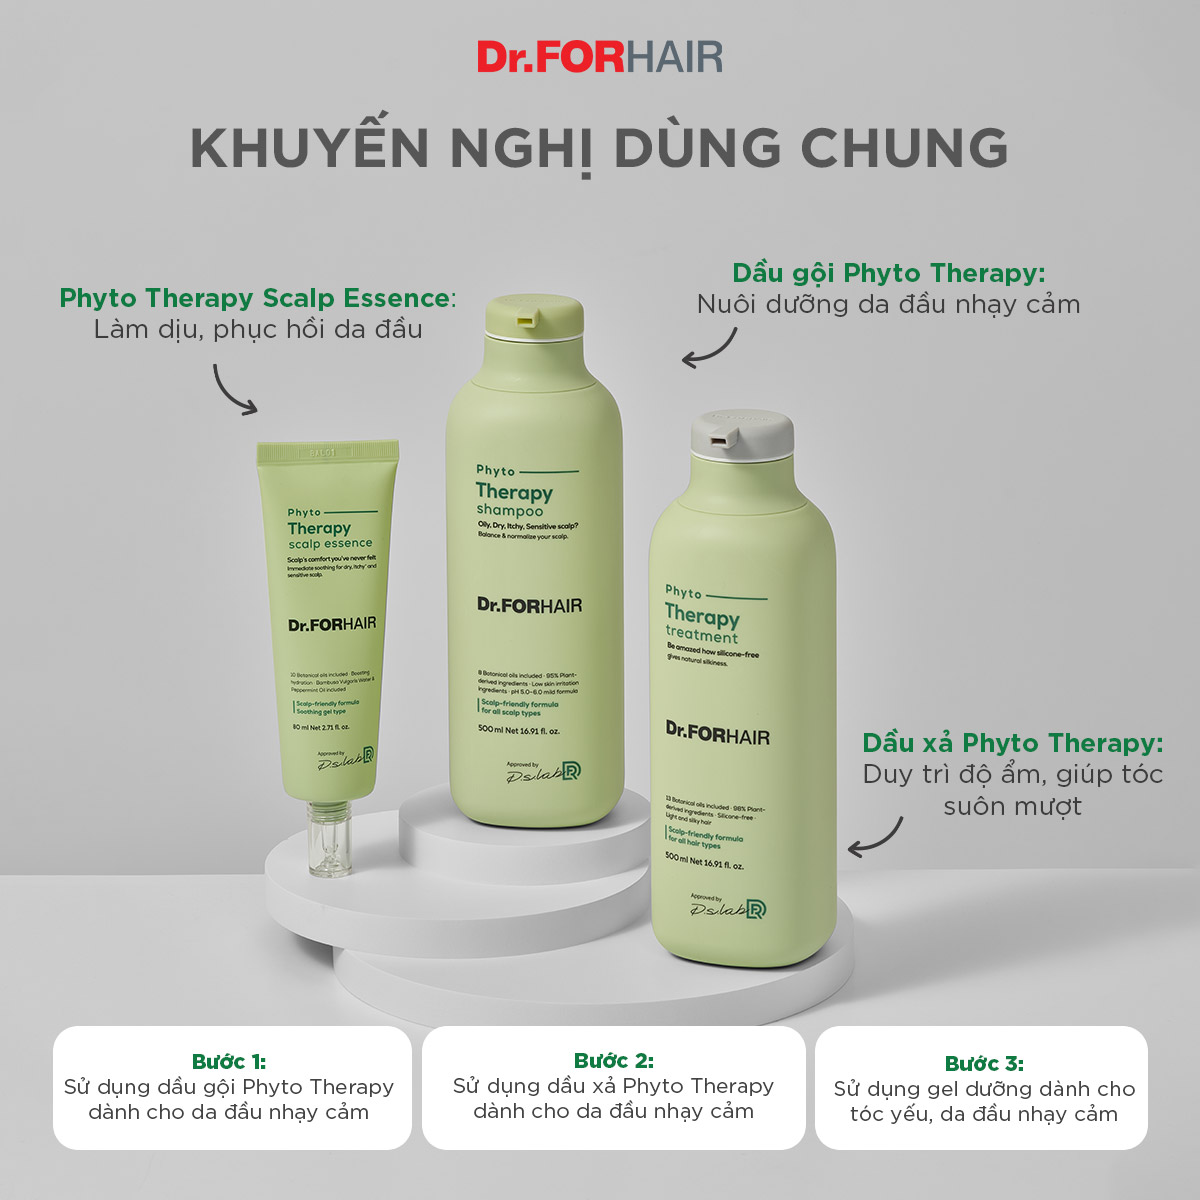 Phyto therapy scalp essence